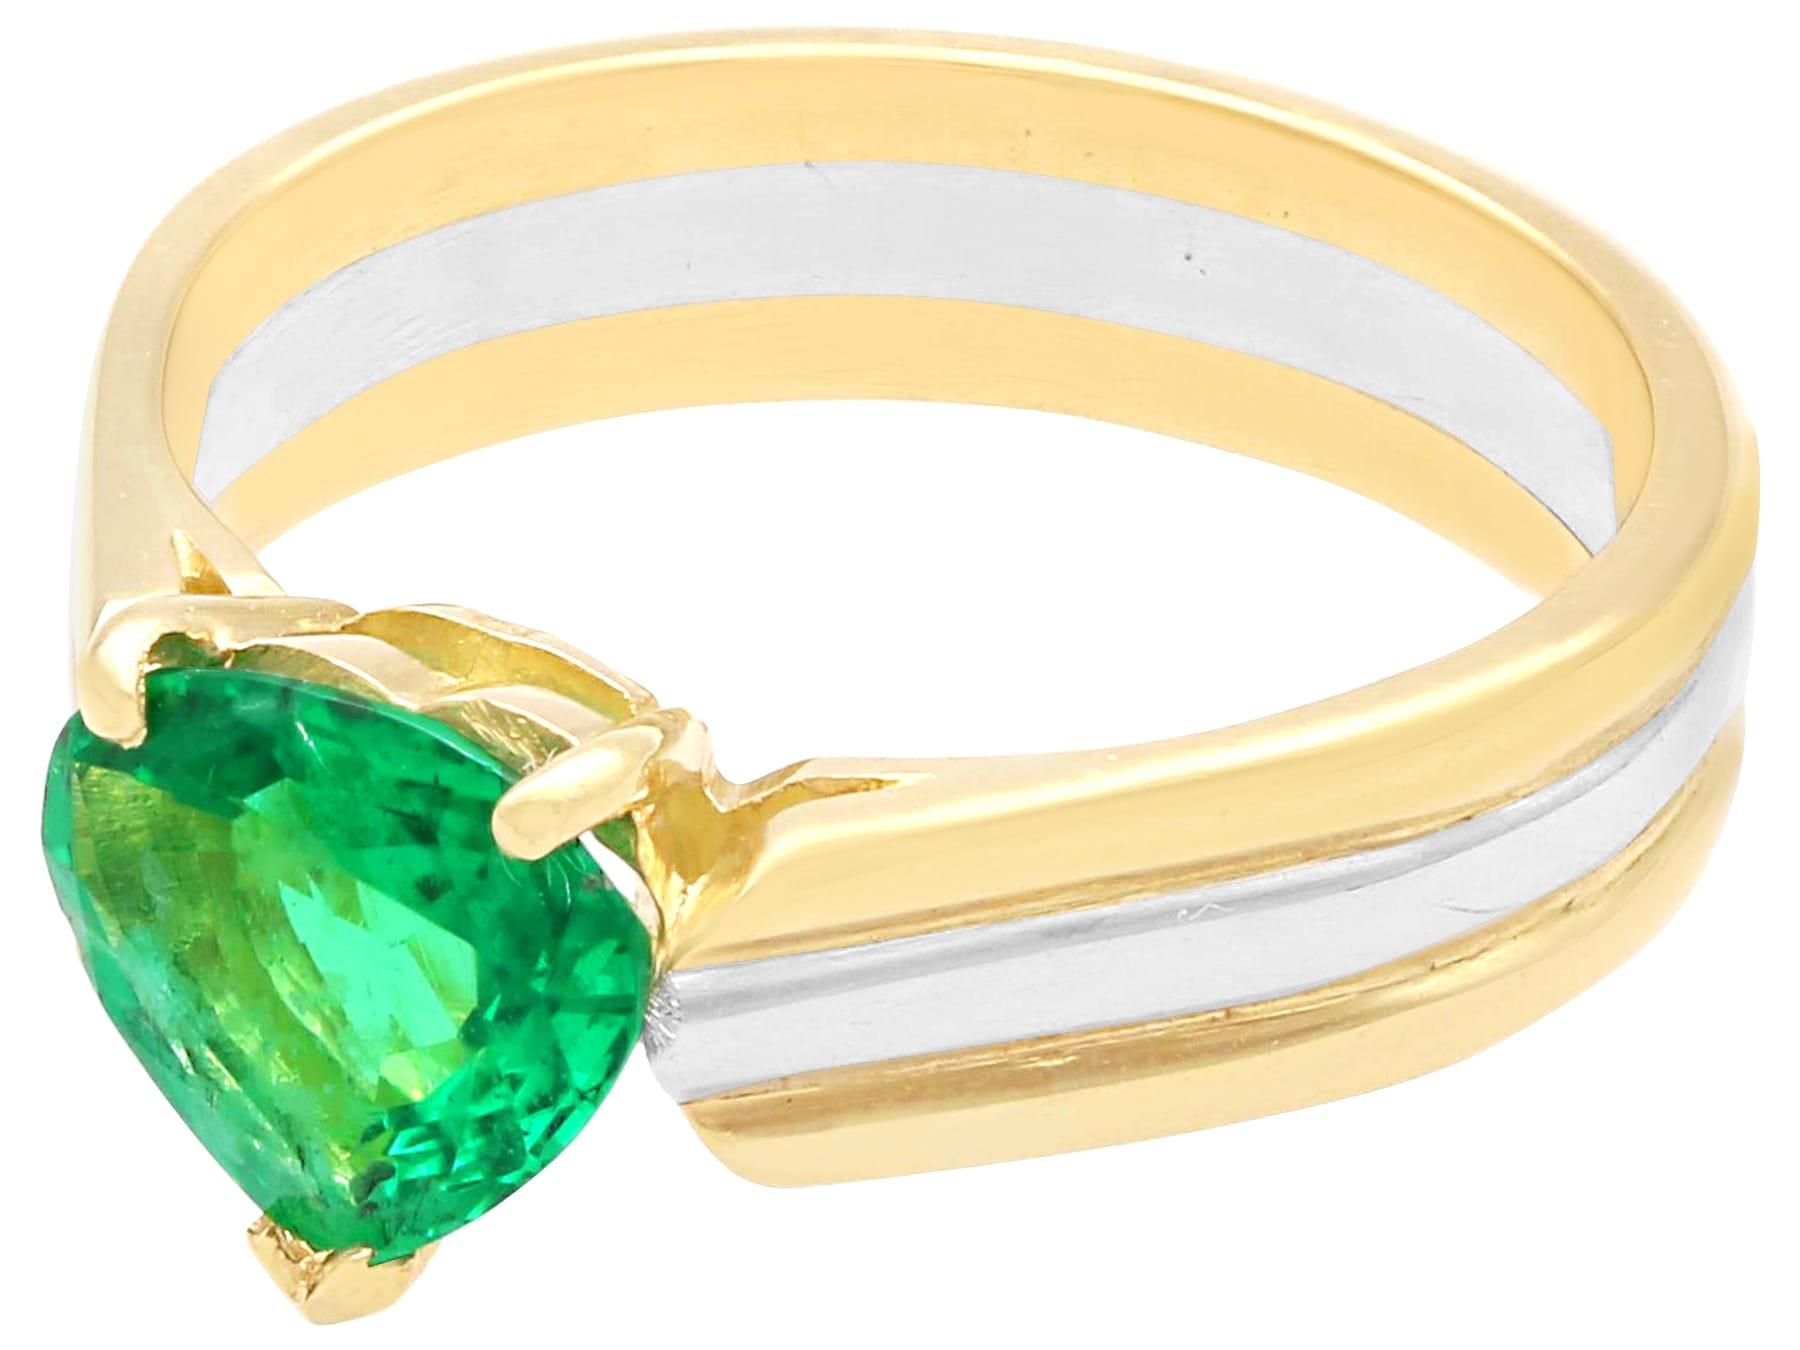 Emerald Cut Vintage 1.02 Carat Emerald 18 Carat Yellow Gold and Platinum Ring For Sale